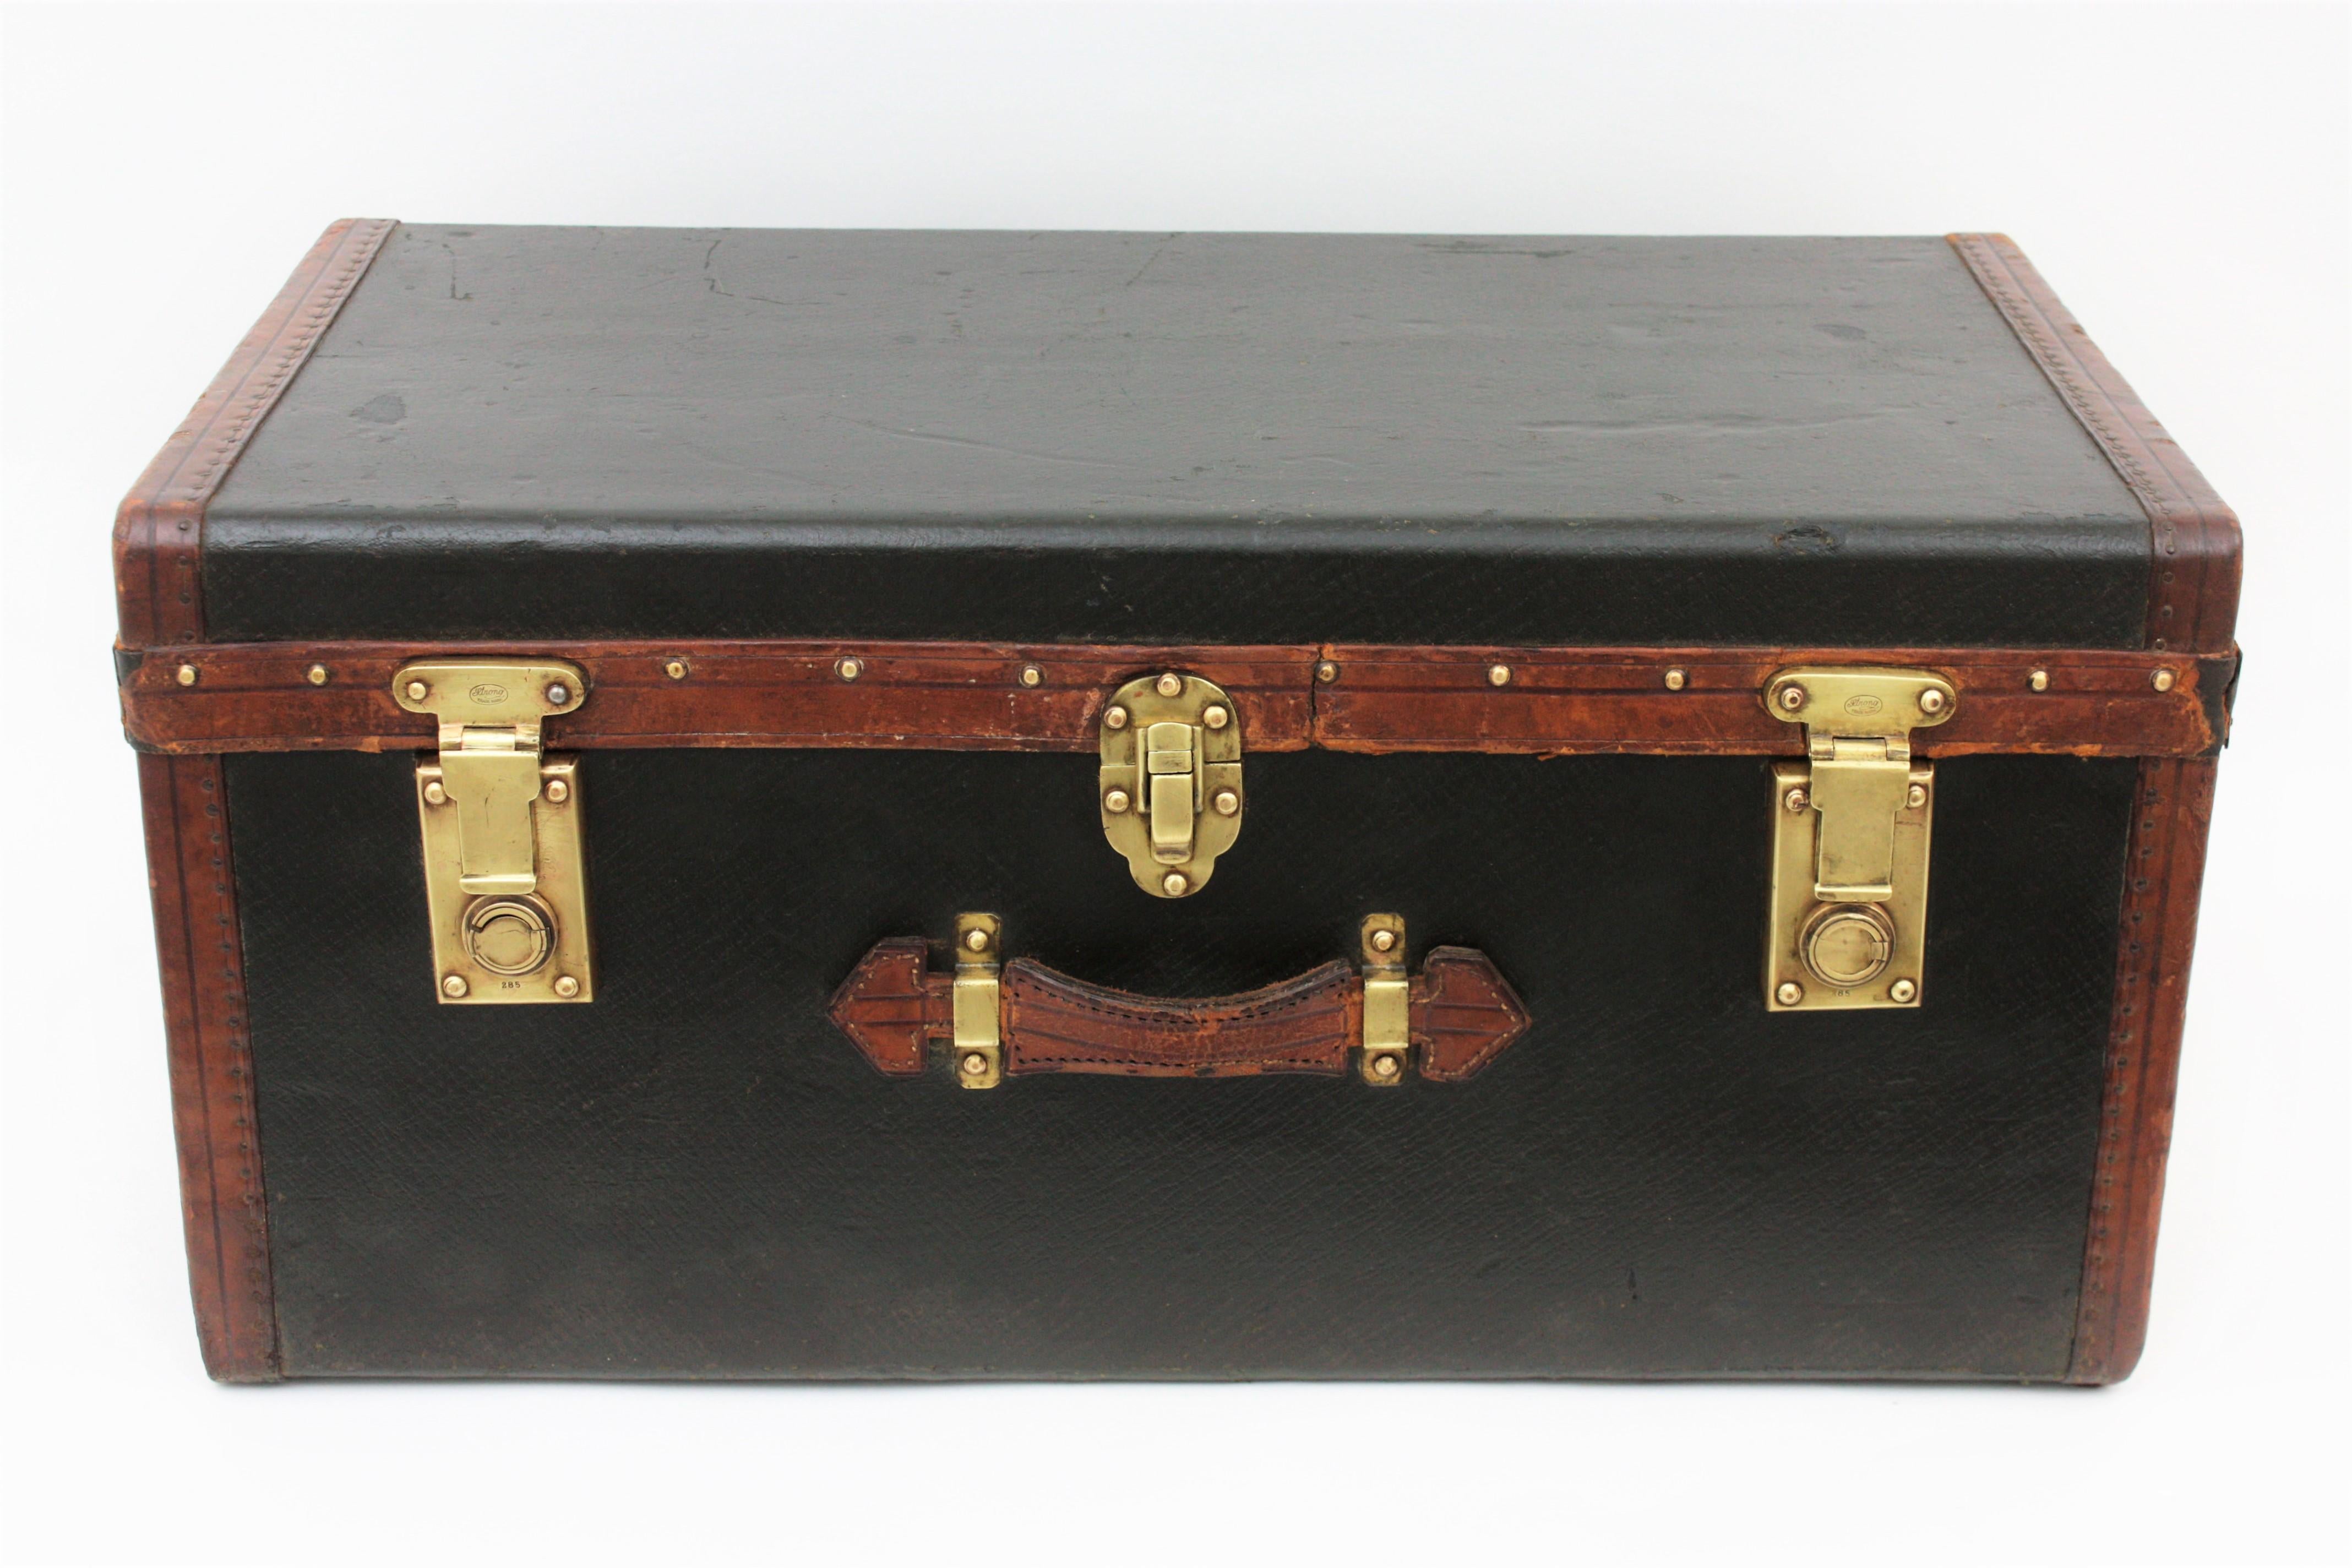 Beautiful leather and canvas trunk with brass locks and fittings. It has two leather handles on the sides and one on the front part. England, Late 19th Century.
It has unusual brass protections to cover the locks.
Made in wood covered with canvas